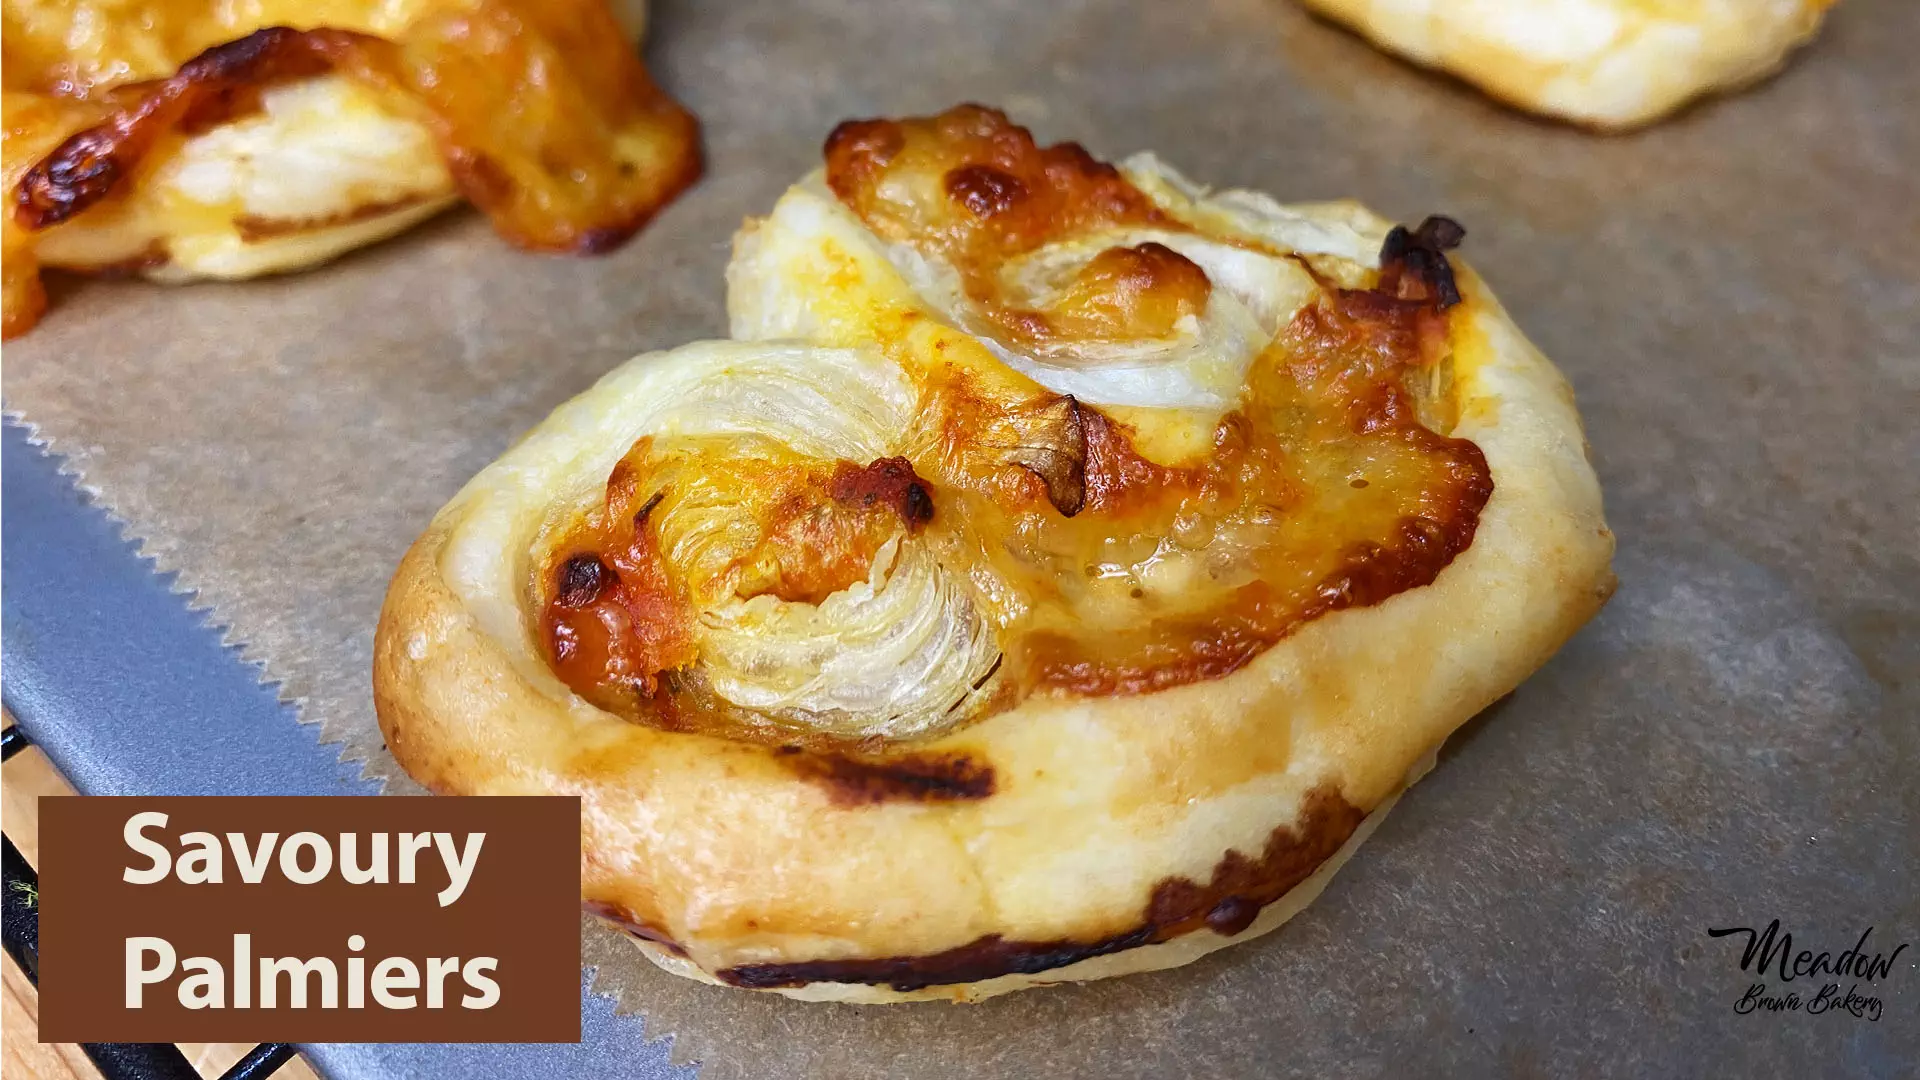 Savoury palmiers : Puff pastry palmiers